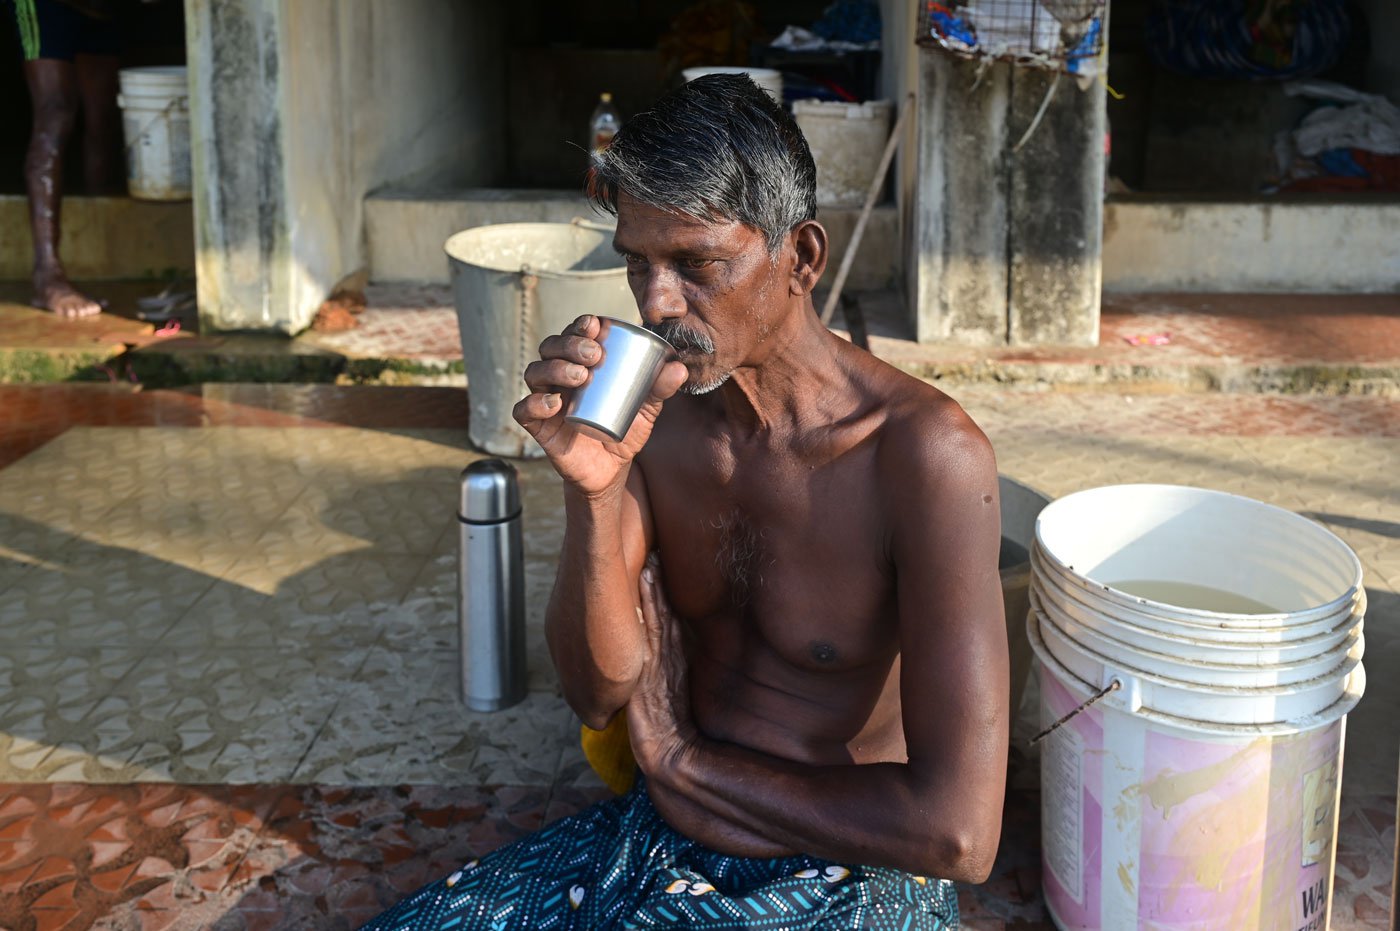 Taking break from his work, a worker sipping hot tea